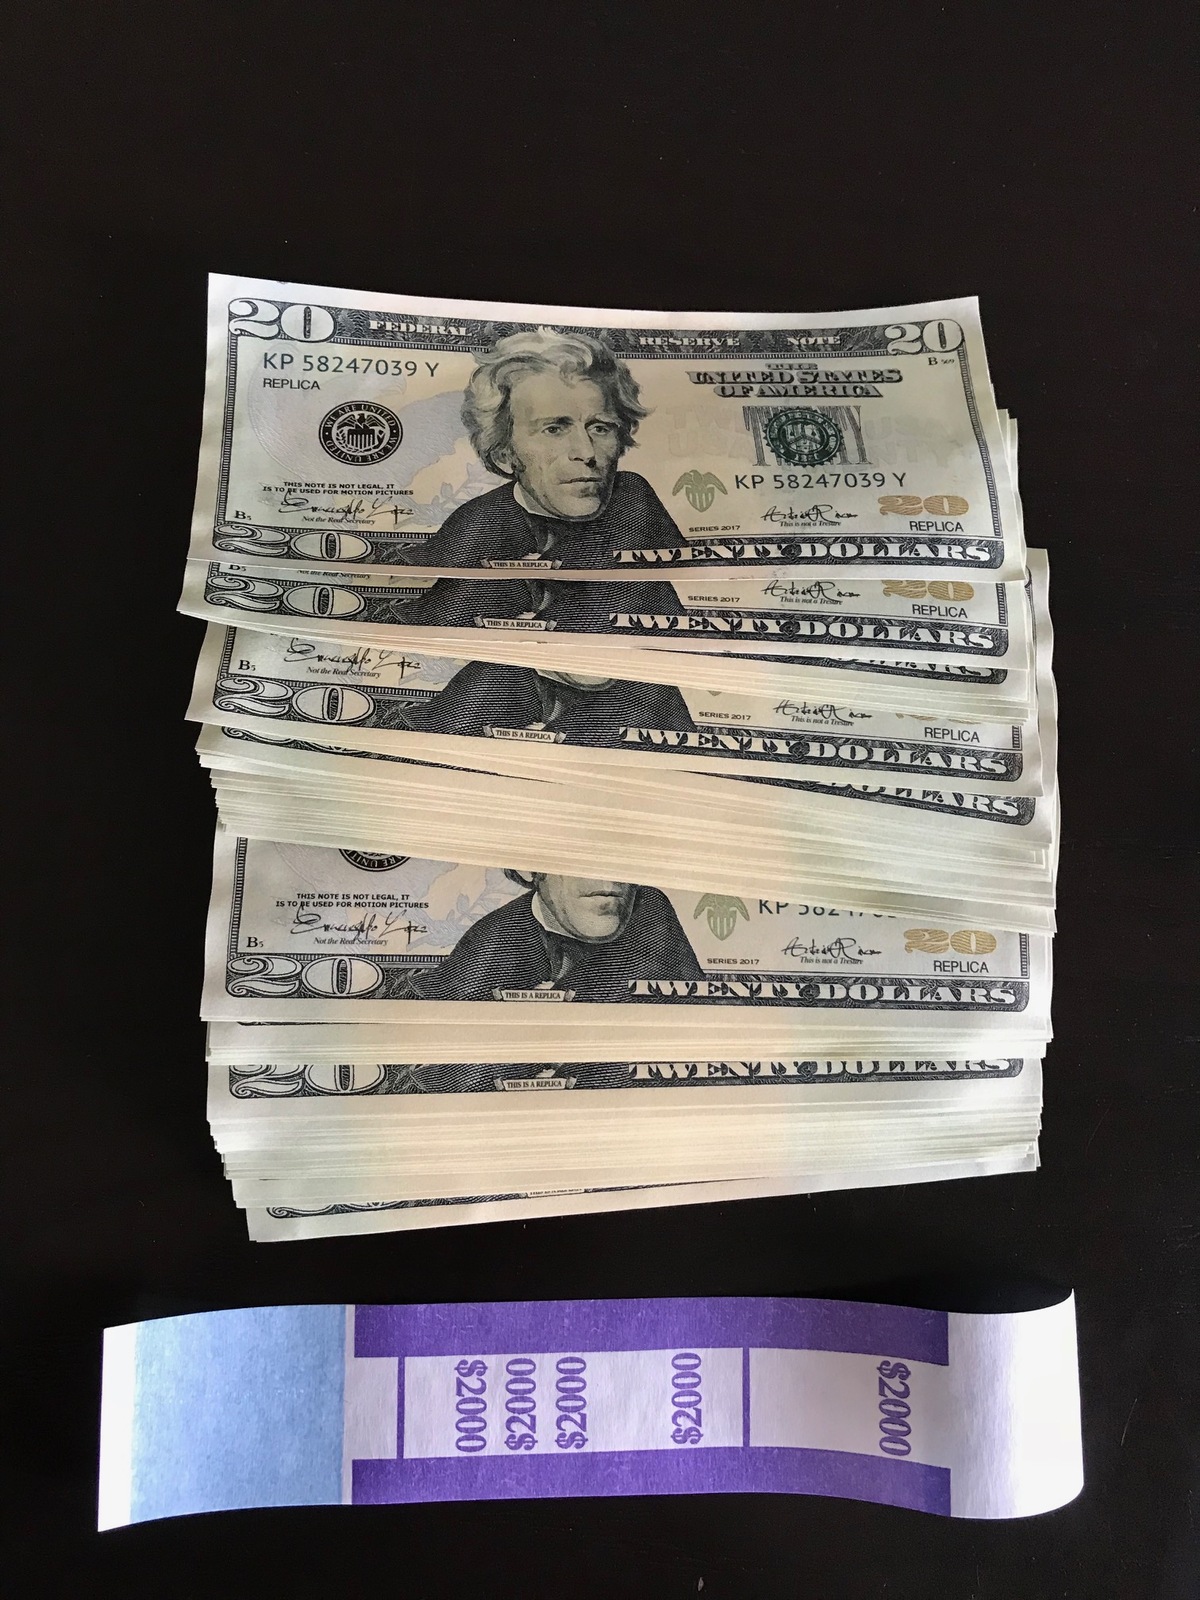 2000 PROP MONEY USED REPLICA 20s All Full Print For Movie Video Films etc. - $25.99